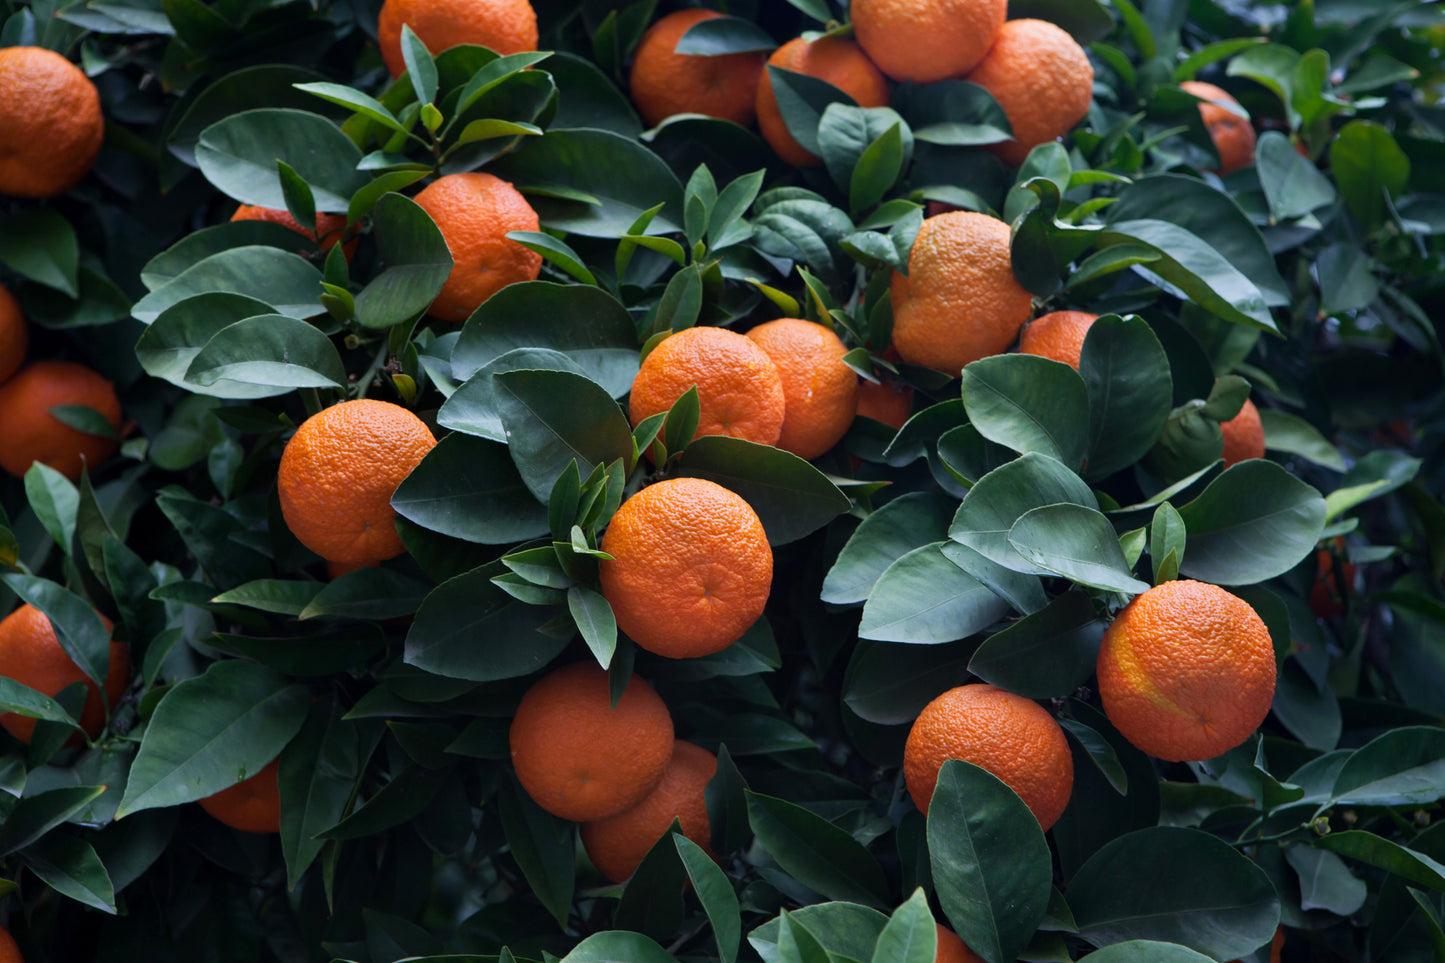 Petitgrain, a type of bitter orange in the citrus family. Photographed here on their plants surrounded by their green leaves.